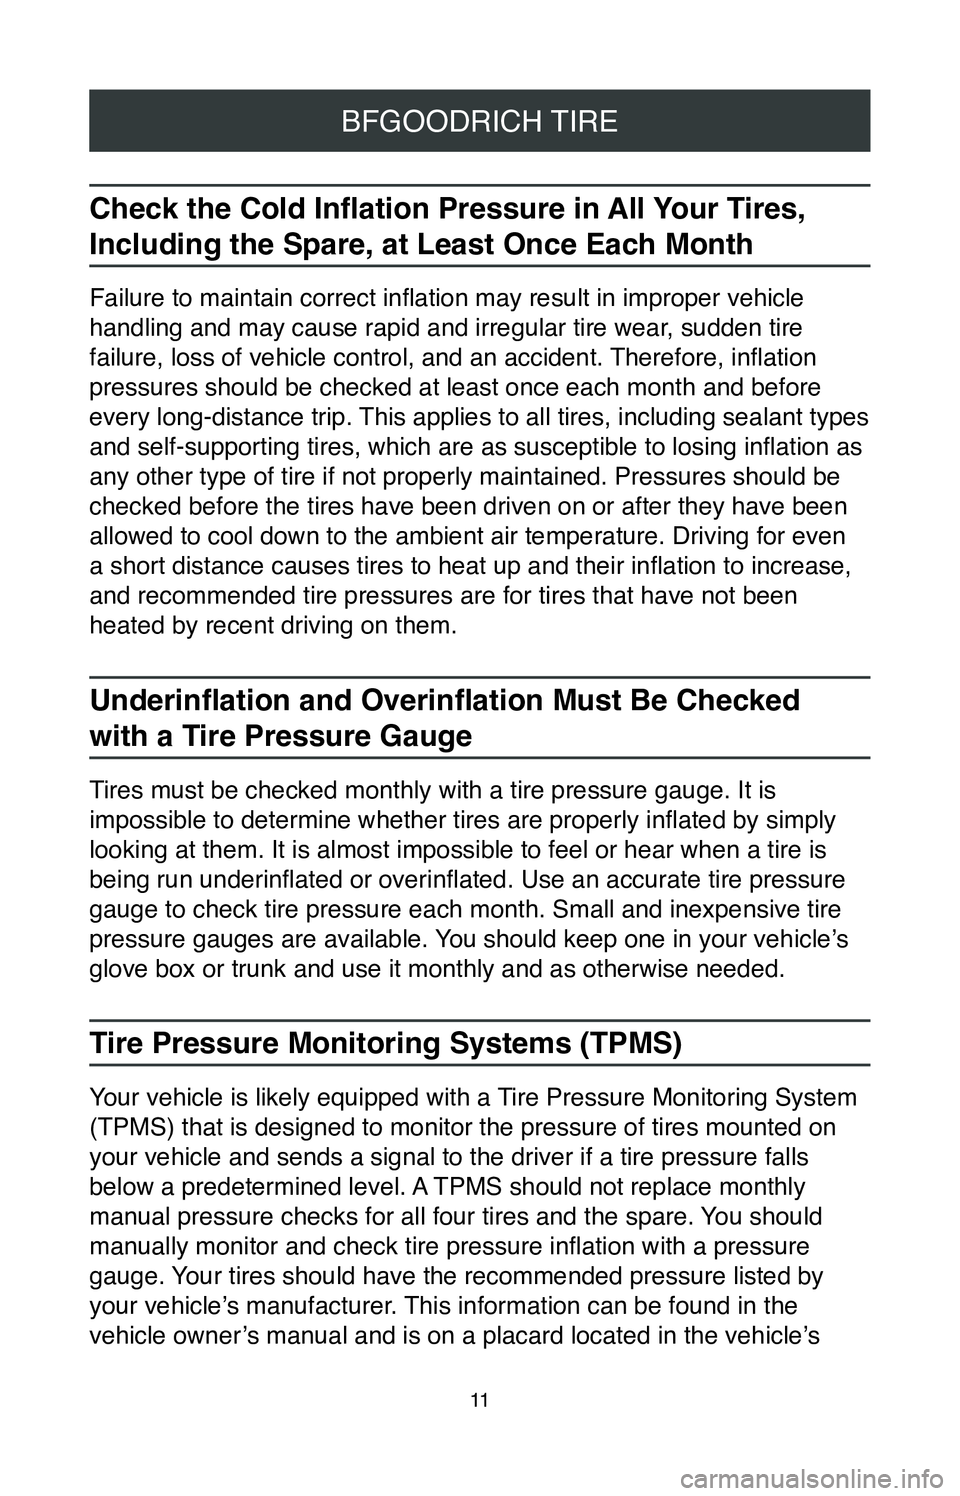 TOYOTA PRIUS 2020  Warranties & Maintenance Guides (in English) 11
BFGOODRICH TIRE
Check the Cold Inflation Pressure in All Your Tires, 
Including the Spare, at Least Once Each Month
Failure to maintain correct inflation may result in improper vehicle 
handling an